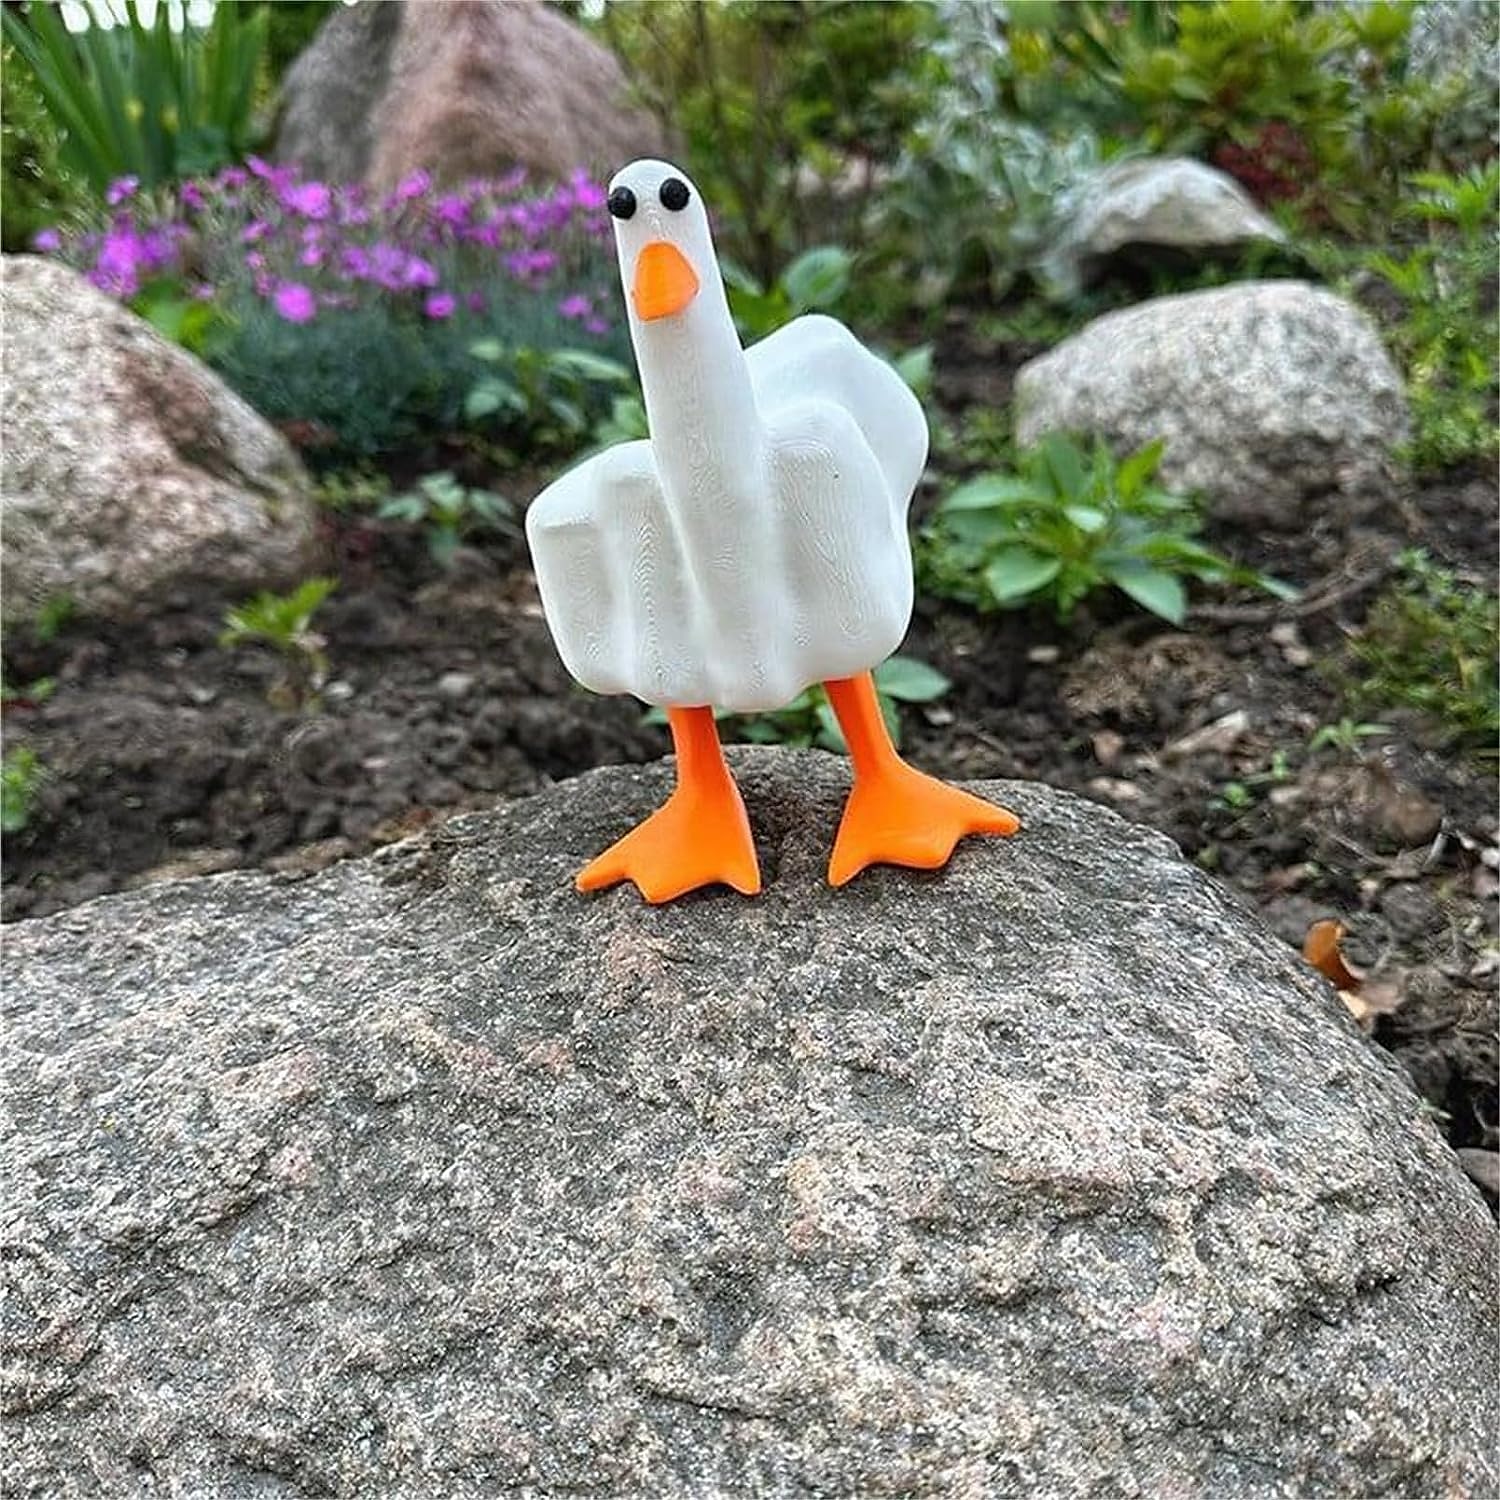 New Duck You Refers To The Cartoon Duck Resin Crafts Garden Sculpture Decoration Design Micro-Landscape 2023 - GBP £9 –P6